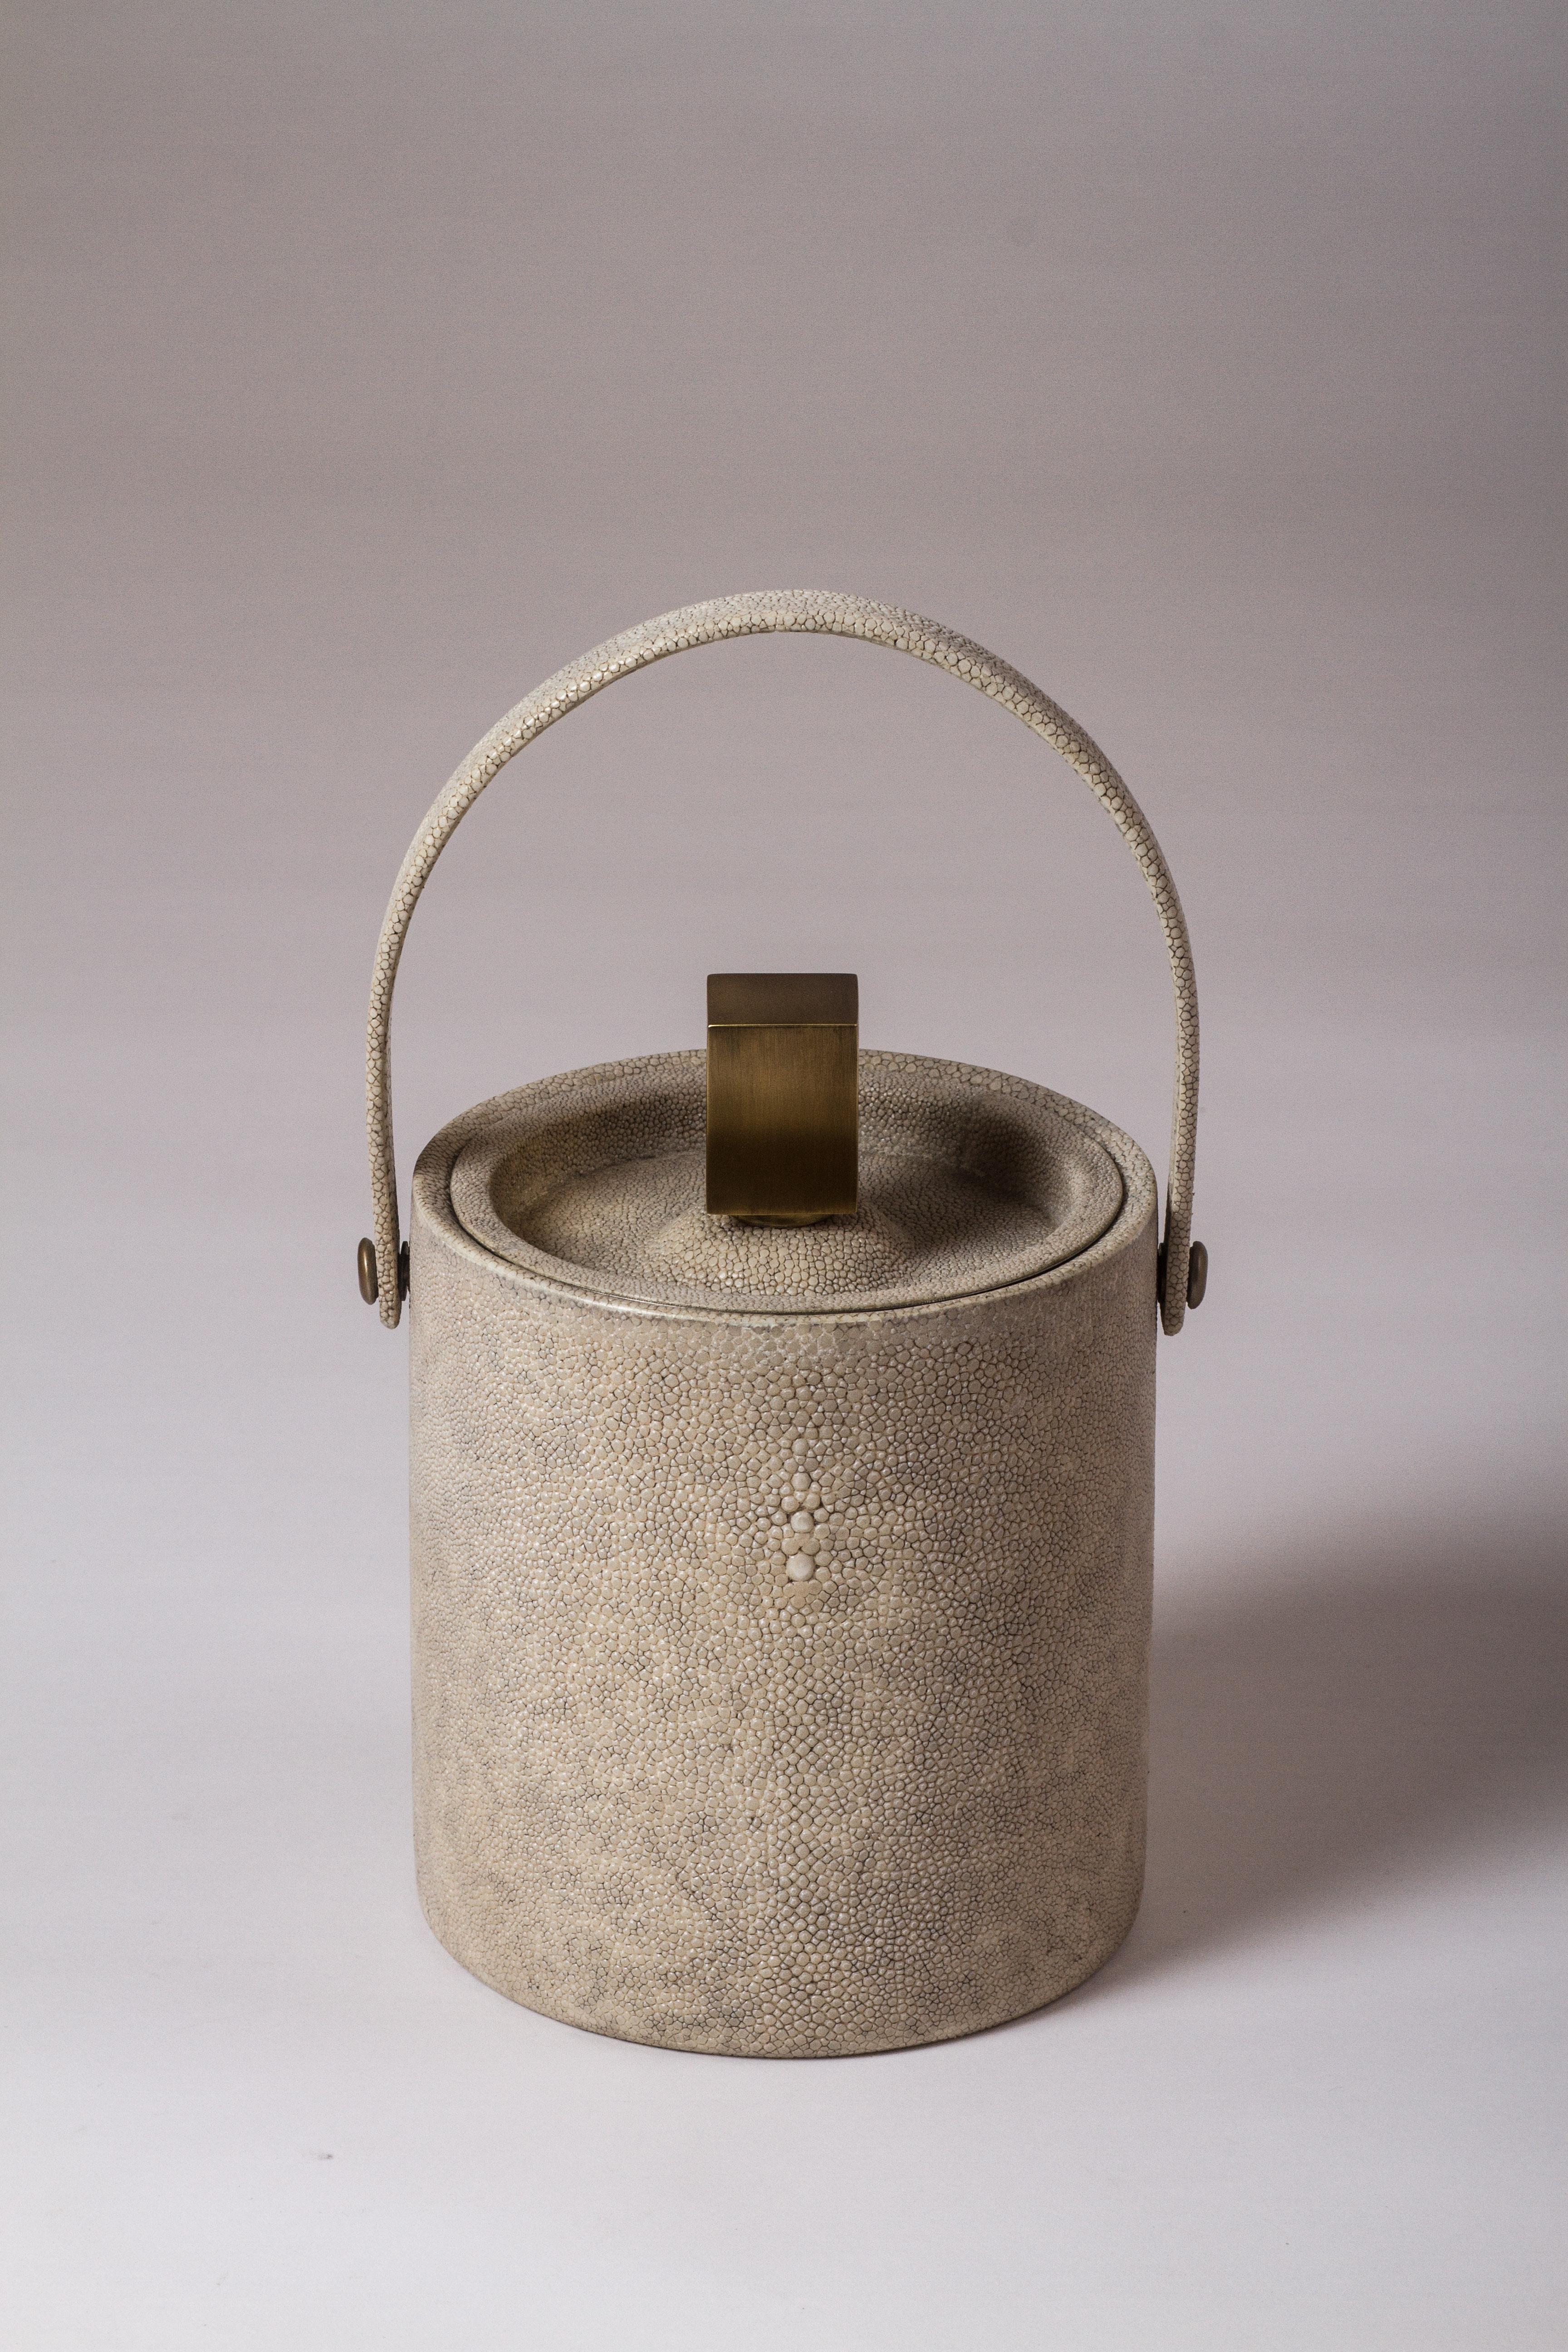 Hand-Crafted Ice Bucket in Shagreen, Shell and Bronze Patina Brass by Kifu Paris For Sale